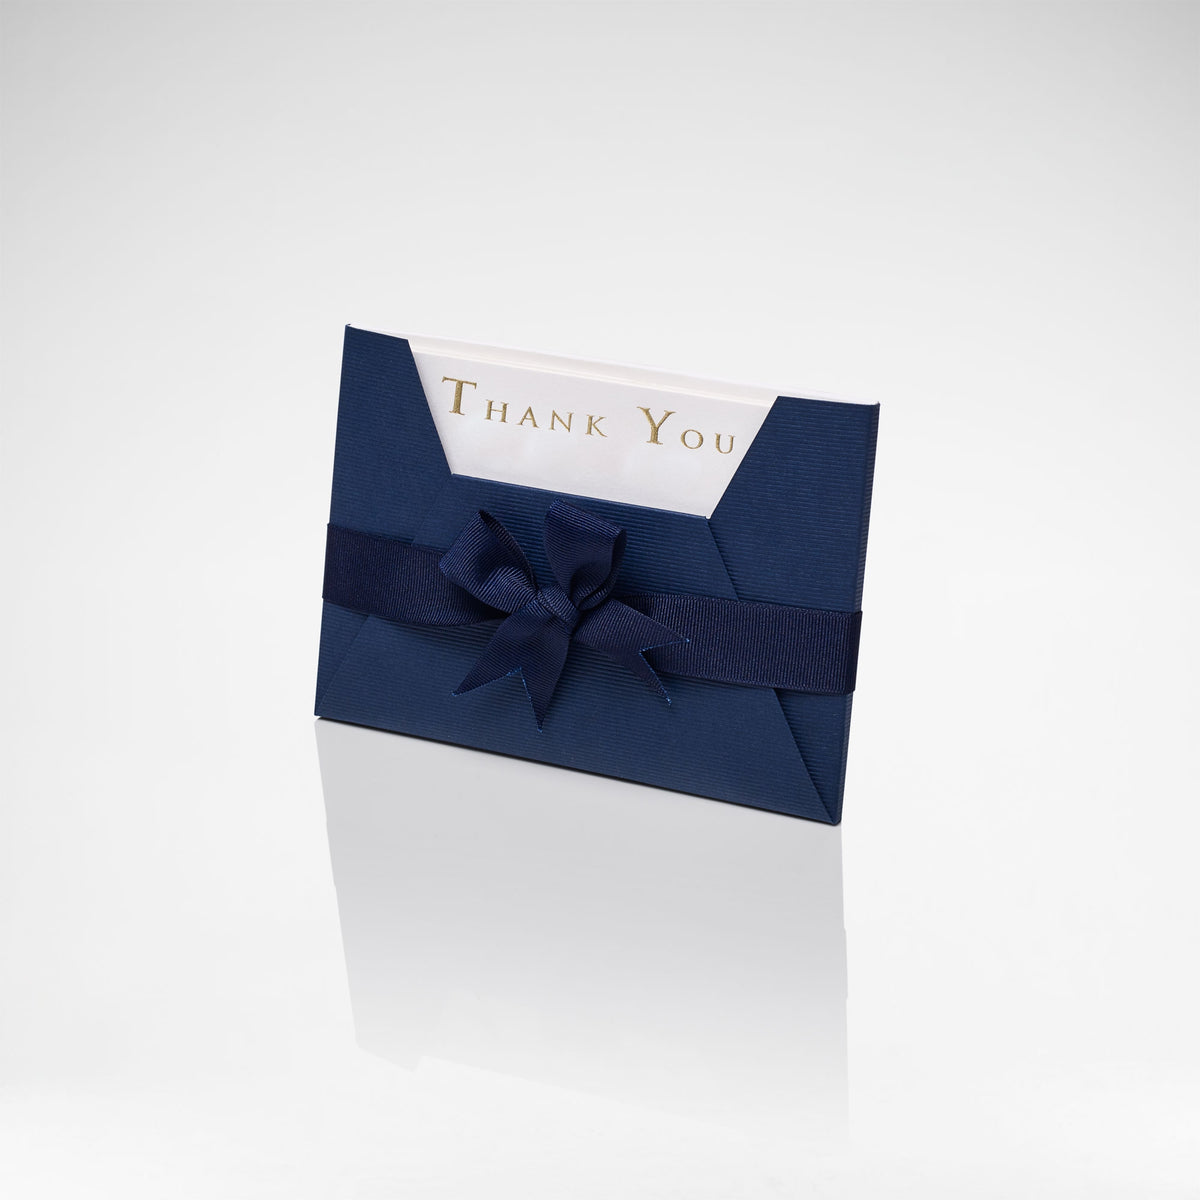 Thank You Cards - Pack of 5 | Luxury Home Accessories & Gifts | LINLEY